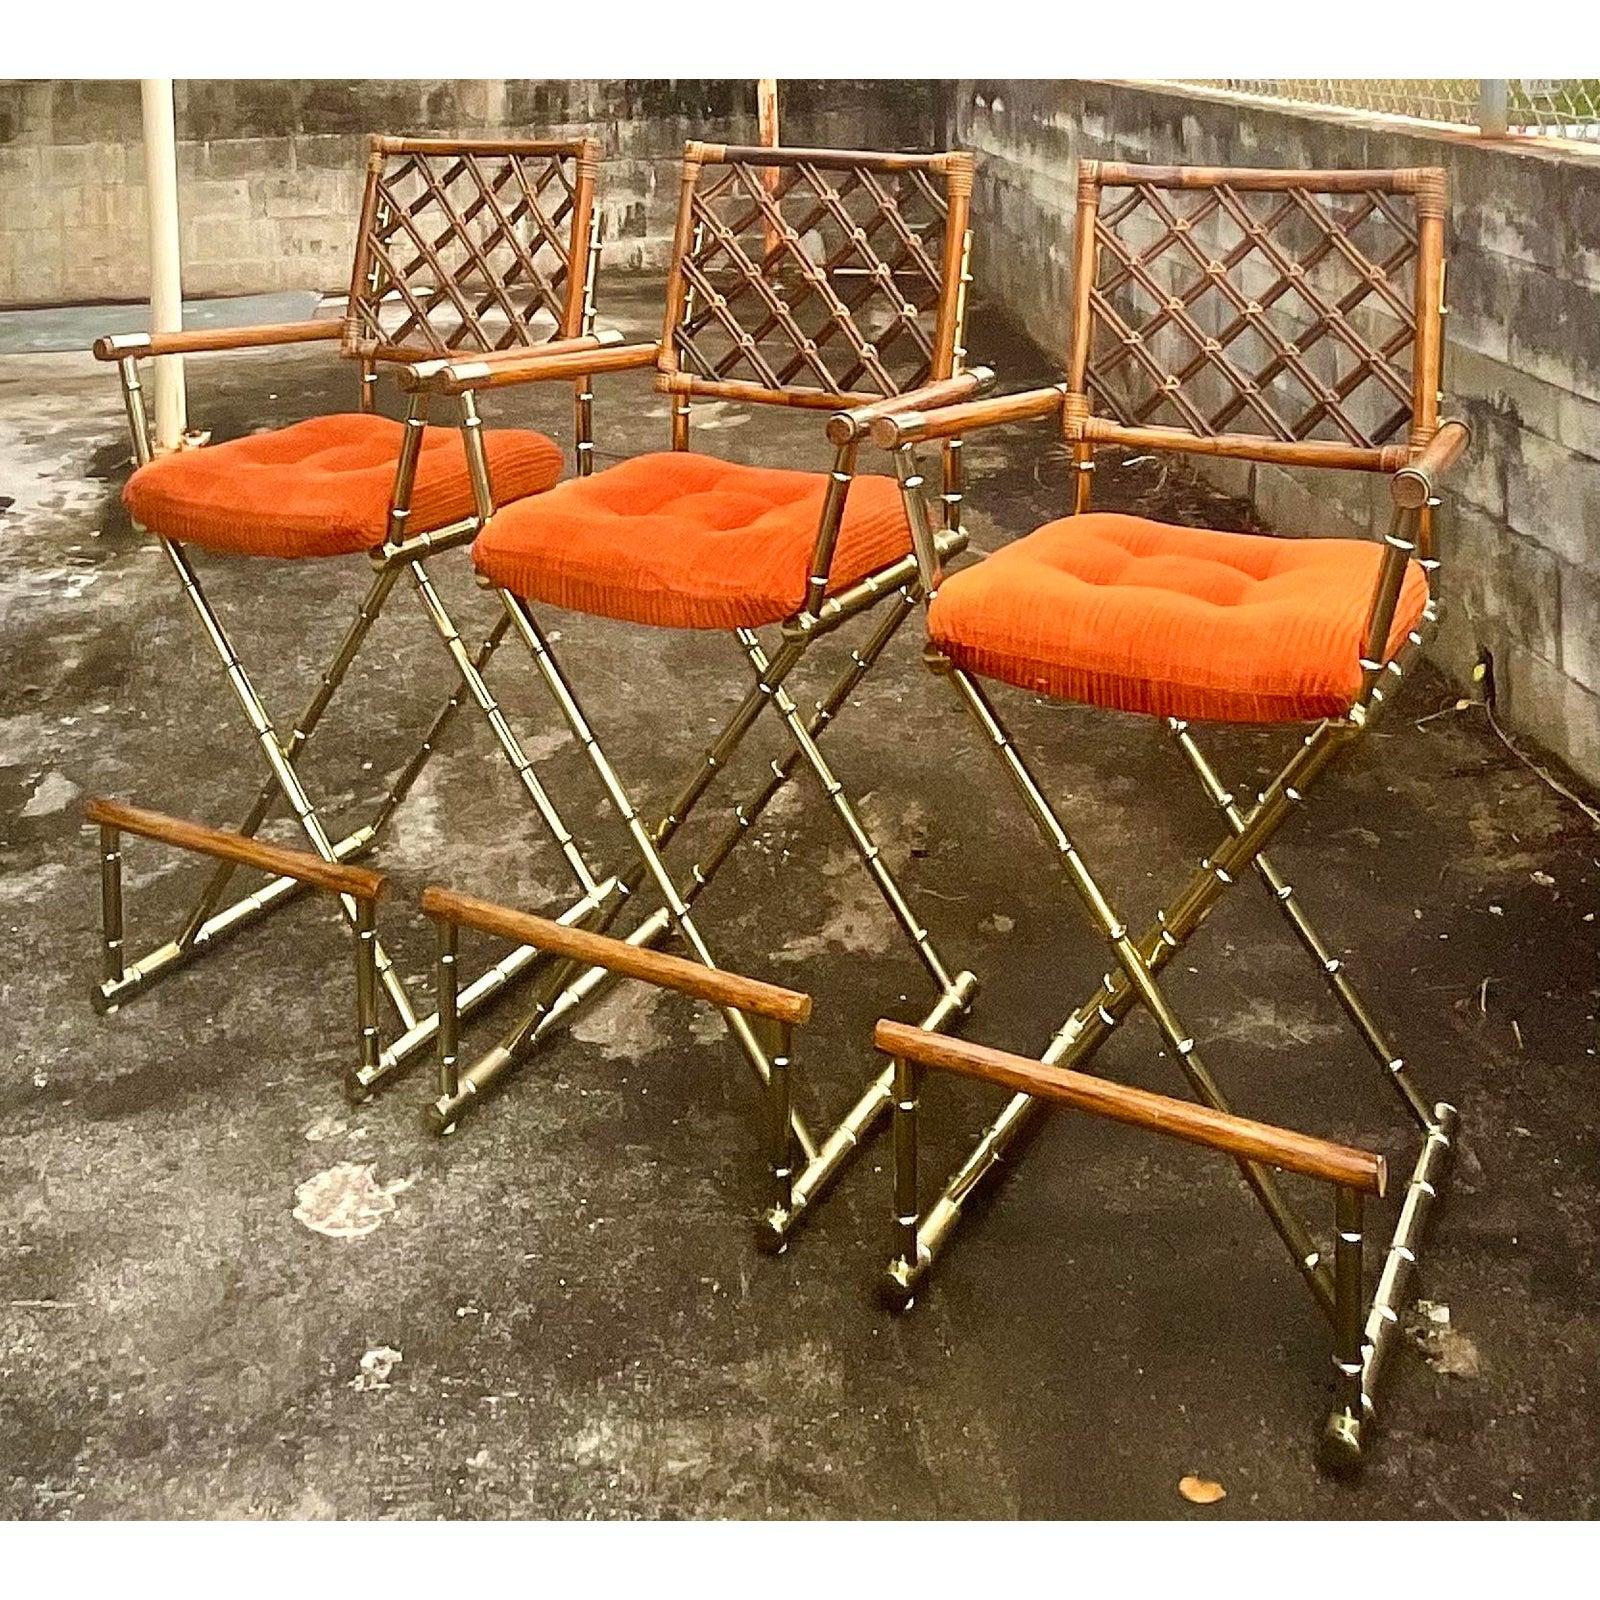 Fantastic set of three vintage boho barstools. Made by the Daystrom group in the US. Brass bamboo frame with a rattan trellis back. Foot rest at the bottom for maximum comfort. Acquired from a Miami estate.